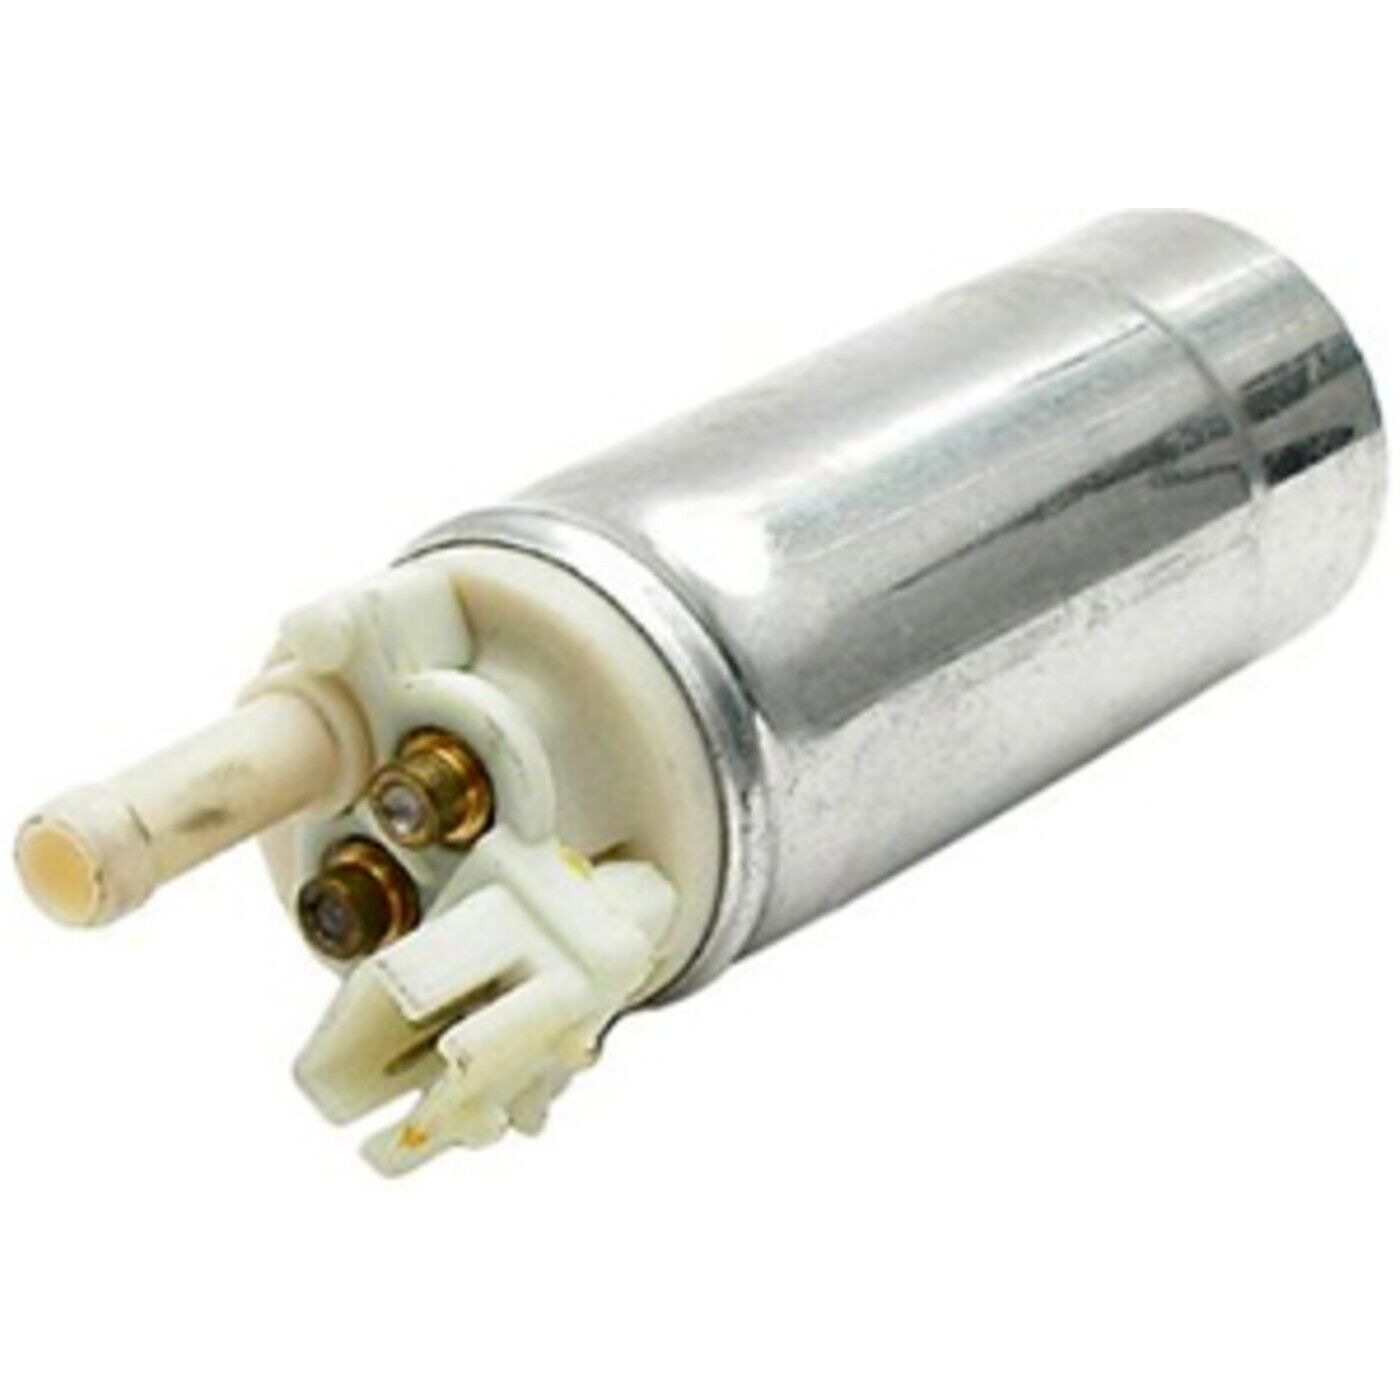 Delphi FE0115 Electric Fuel Pump Gas for Chevy Olds Suburban SaVana S15 Pickup